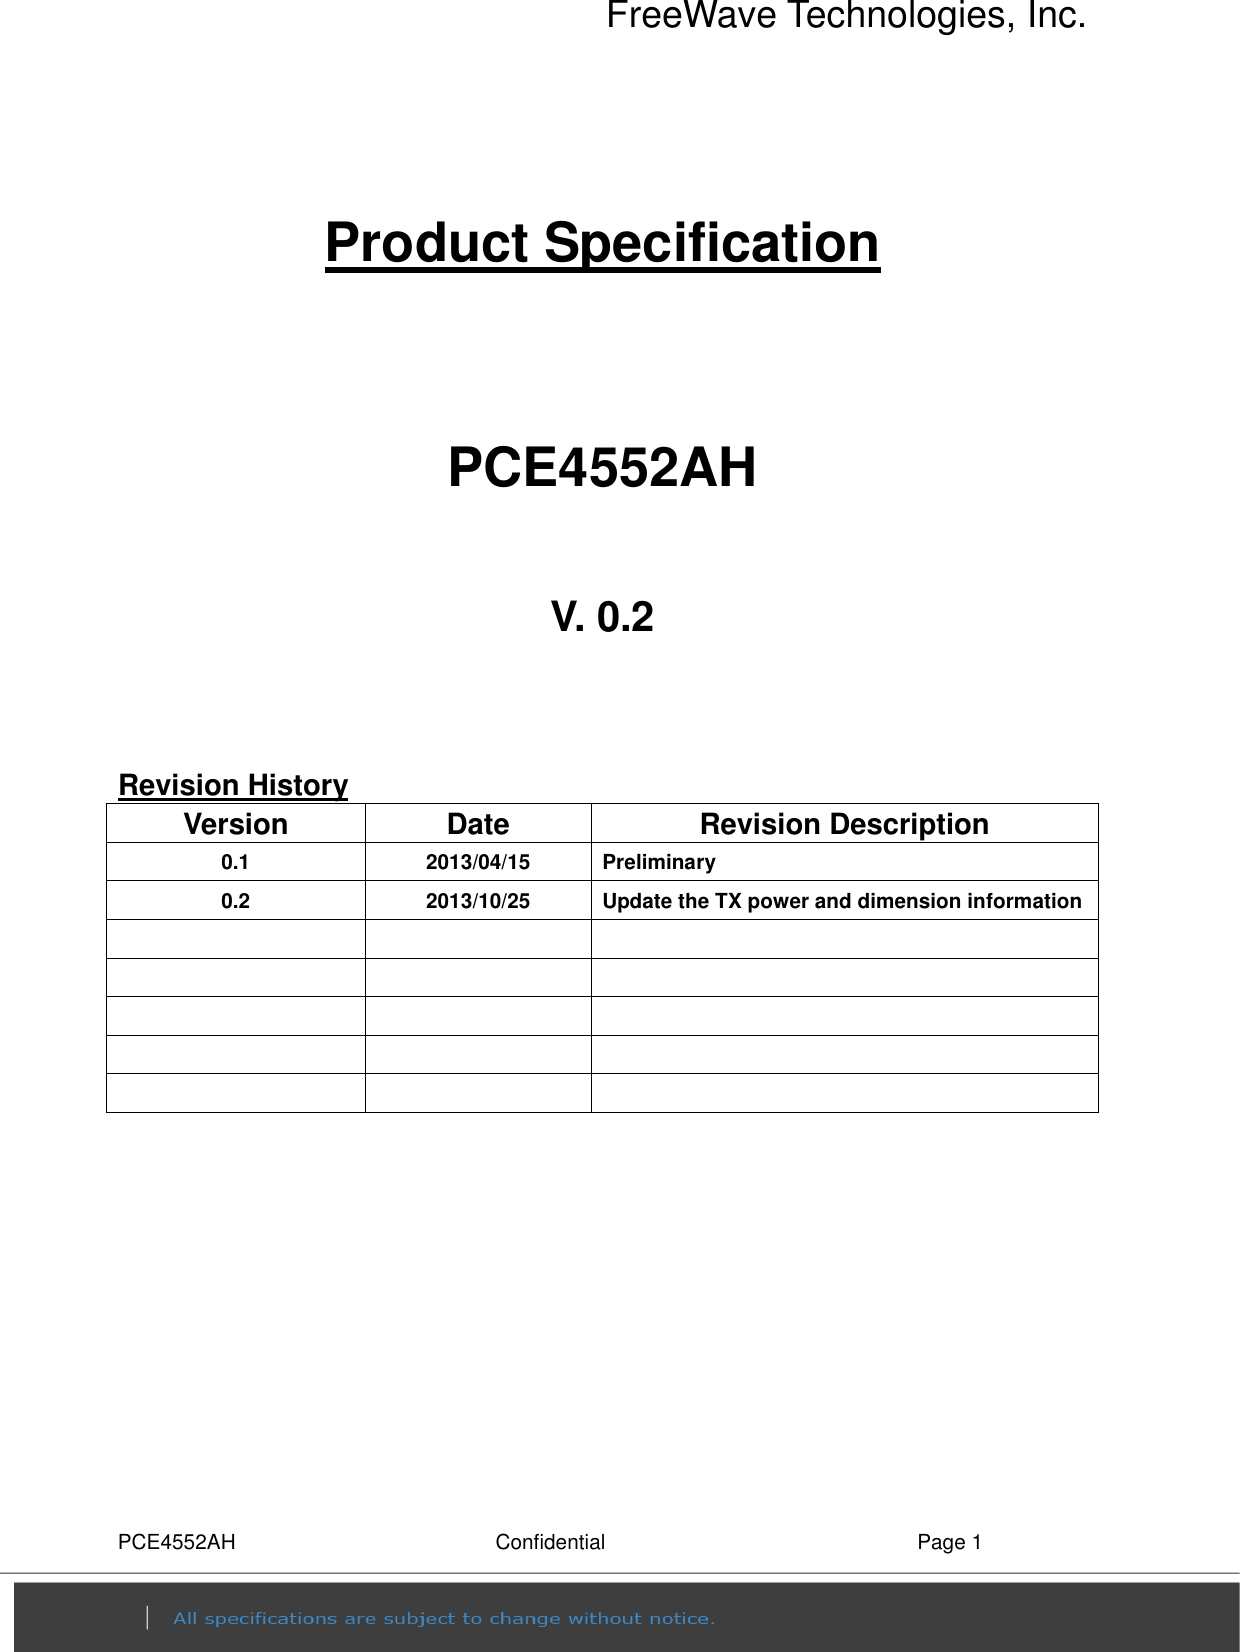 FreeWave Technologies, Inc. PCE4552AH  Confidential  Page 1  Product Specification   PCE4552AH  V. 0.2   Revision History Version  Date  Revision Description 0.1  2013/04/15  Preliminary 0.2  2013/10/25  Update the TX power and dimension information                           